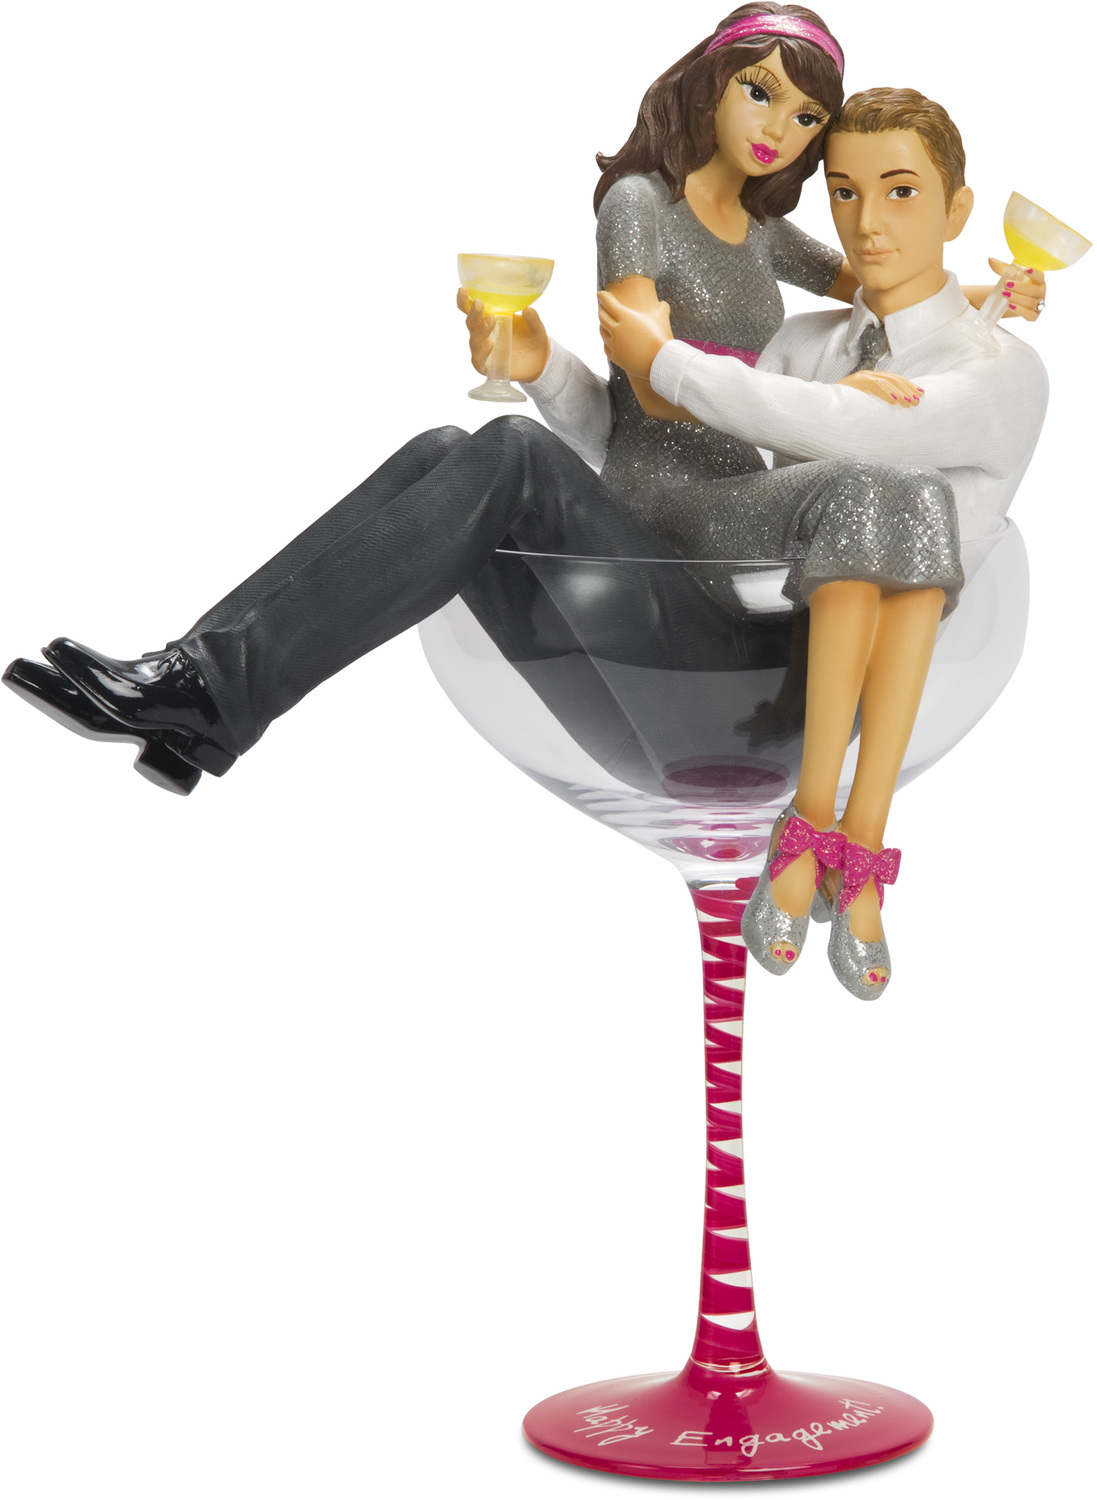 Happy Engagement! by Hiccup - <em>Wedding</em> - Figurine/Cake Topper & Champagne Glass -